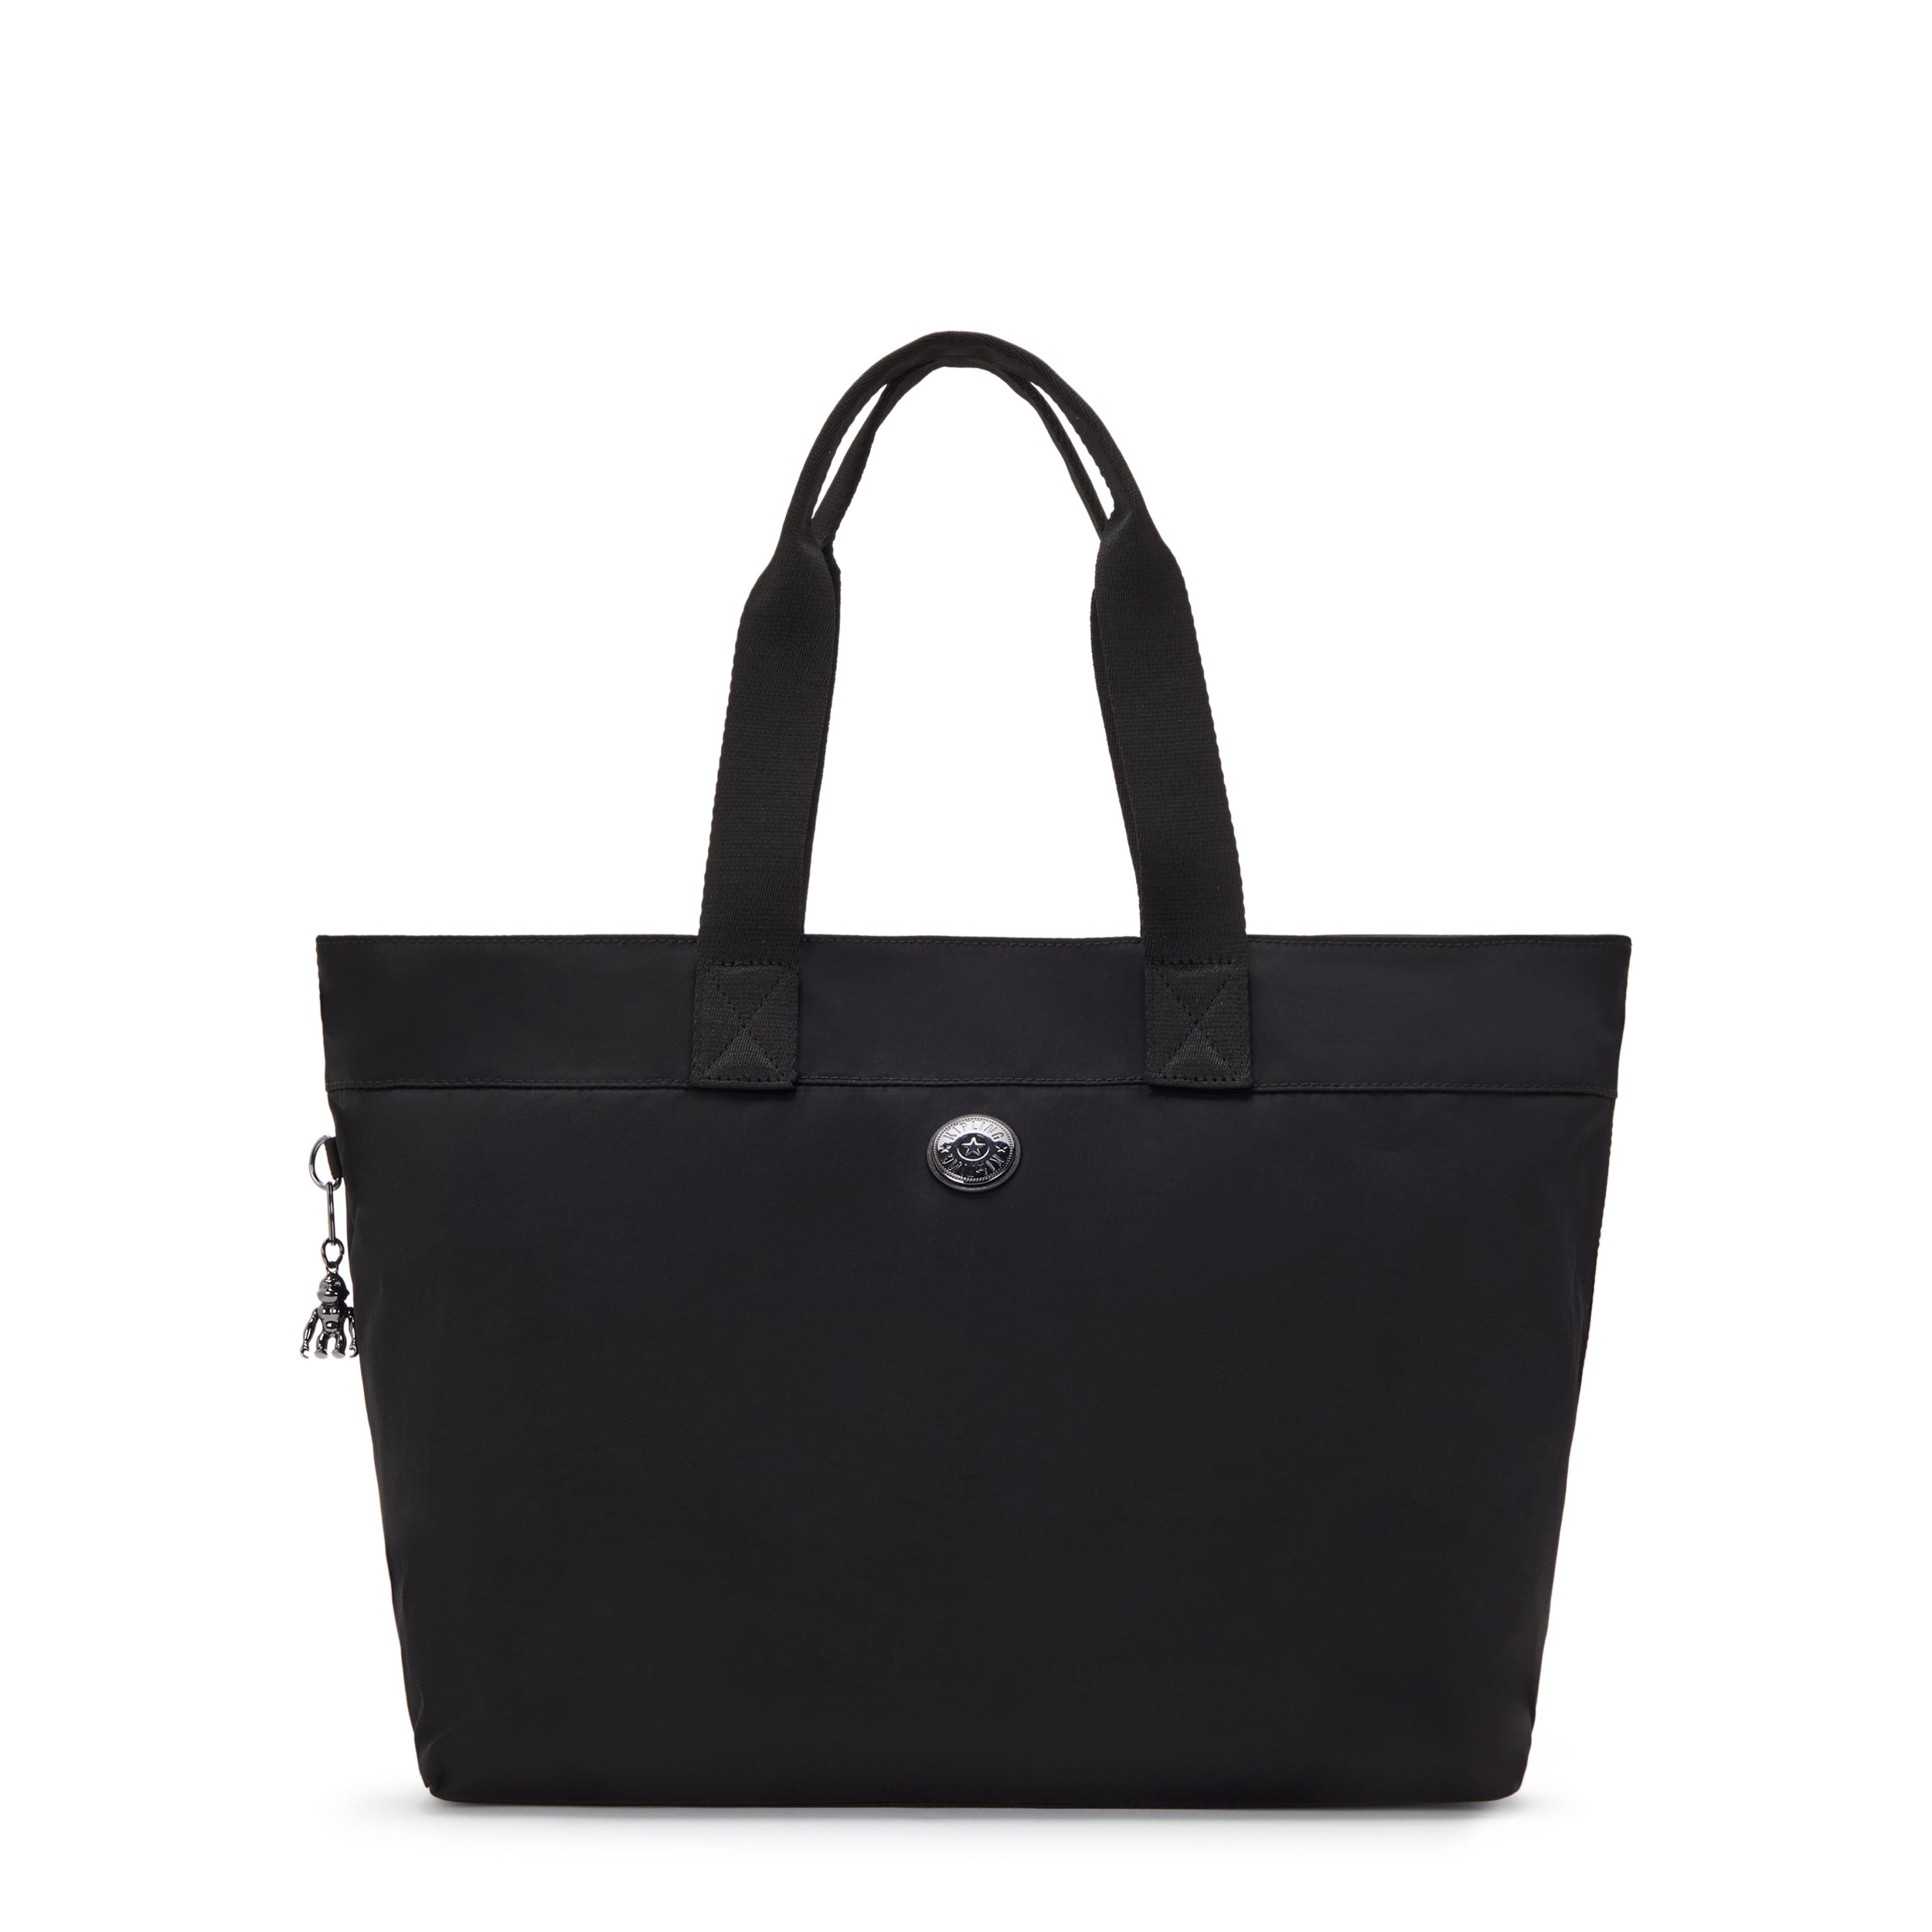 KIPLING-Colissa-Large Tote with Laptop Compartment-Endless Black-I7962-TB4